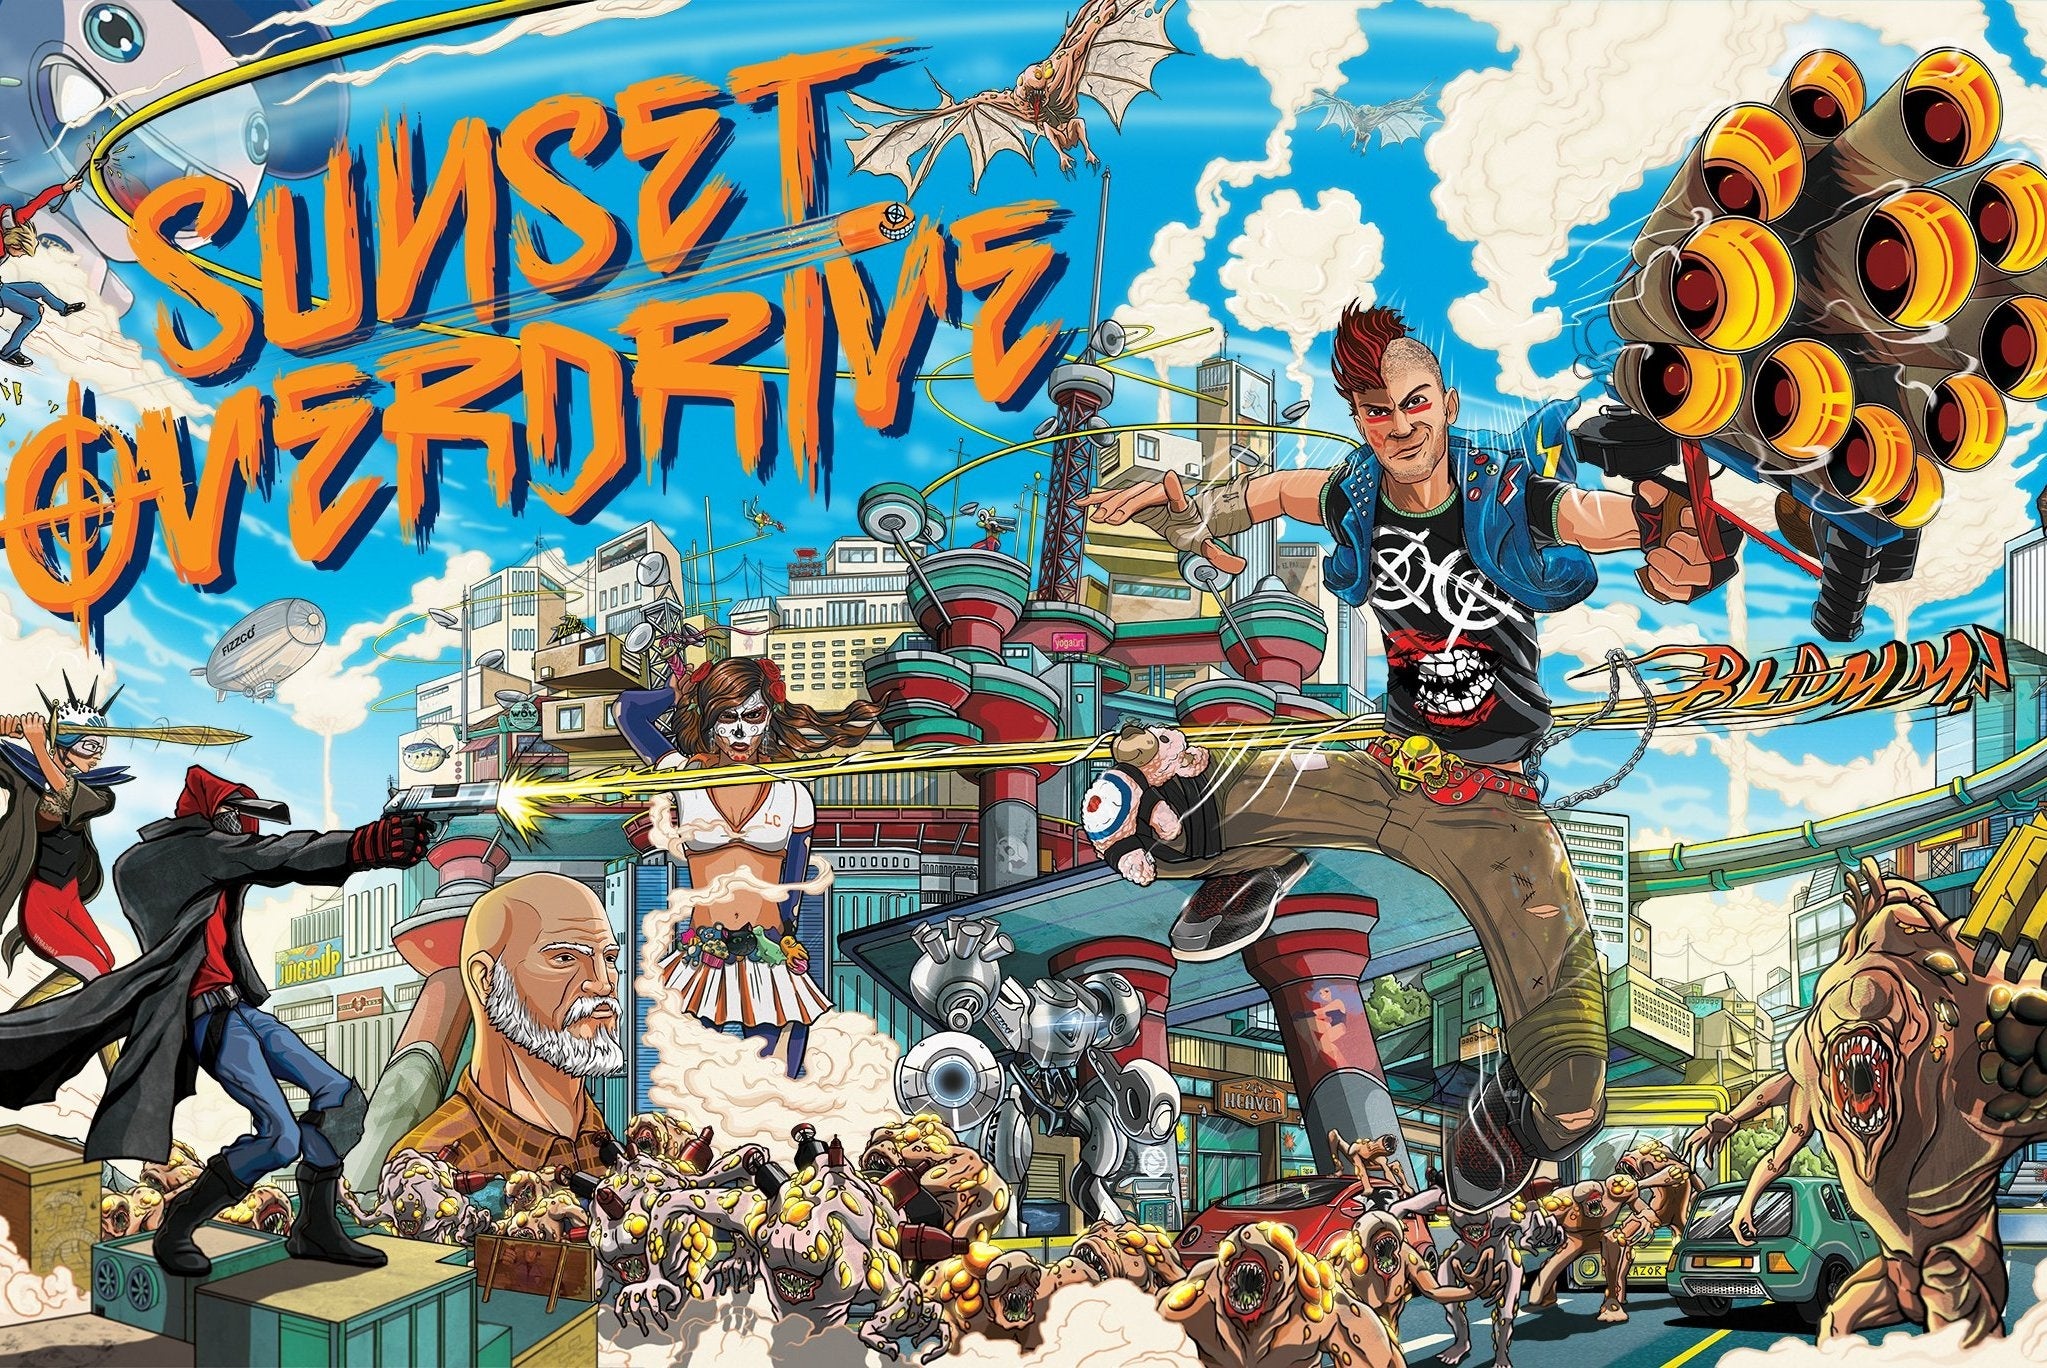 Image for Video: See Sunset Overdrive in glorious action